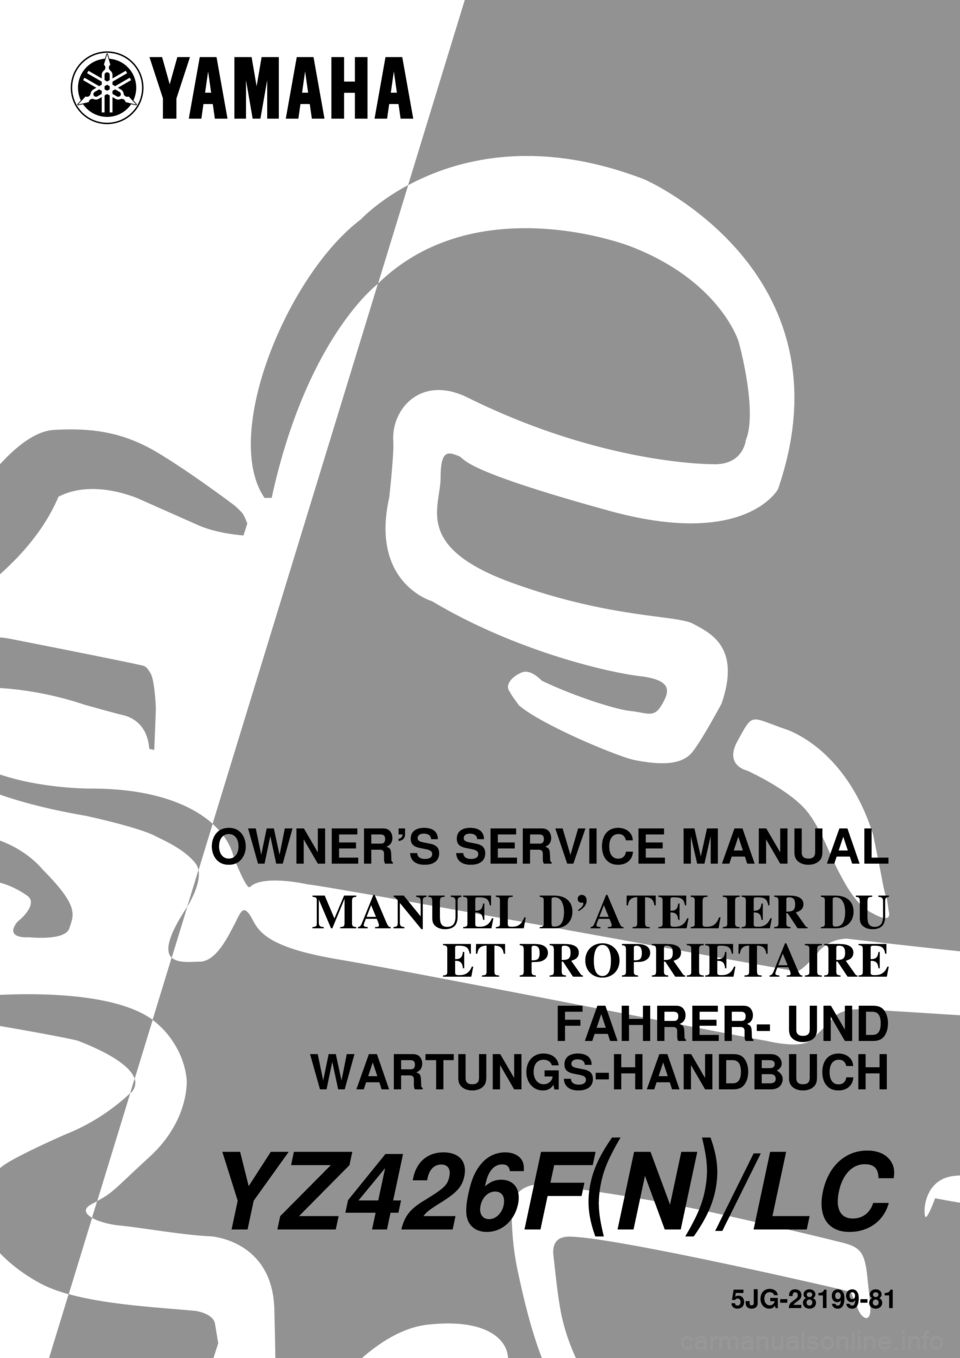 YAMAHA YZ426F 2001  Notices Demploi (in French)      
 
 
 
5JG-28199-81
YZ426F(N)/LC
OWNER’S SERVICE MANUAL
MANUEL D’ATELIER DU
ET PROPRIETAIRE
FAHRER- UND
WARTUNGS-HANDBUCH 